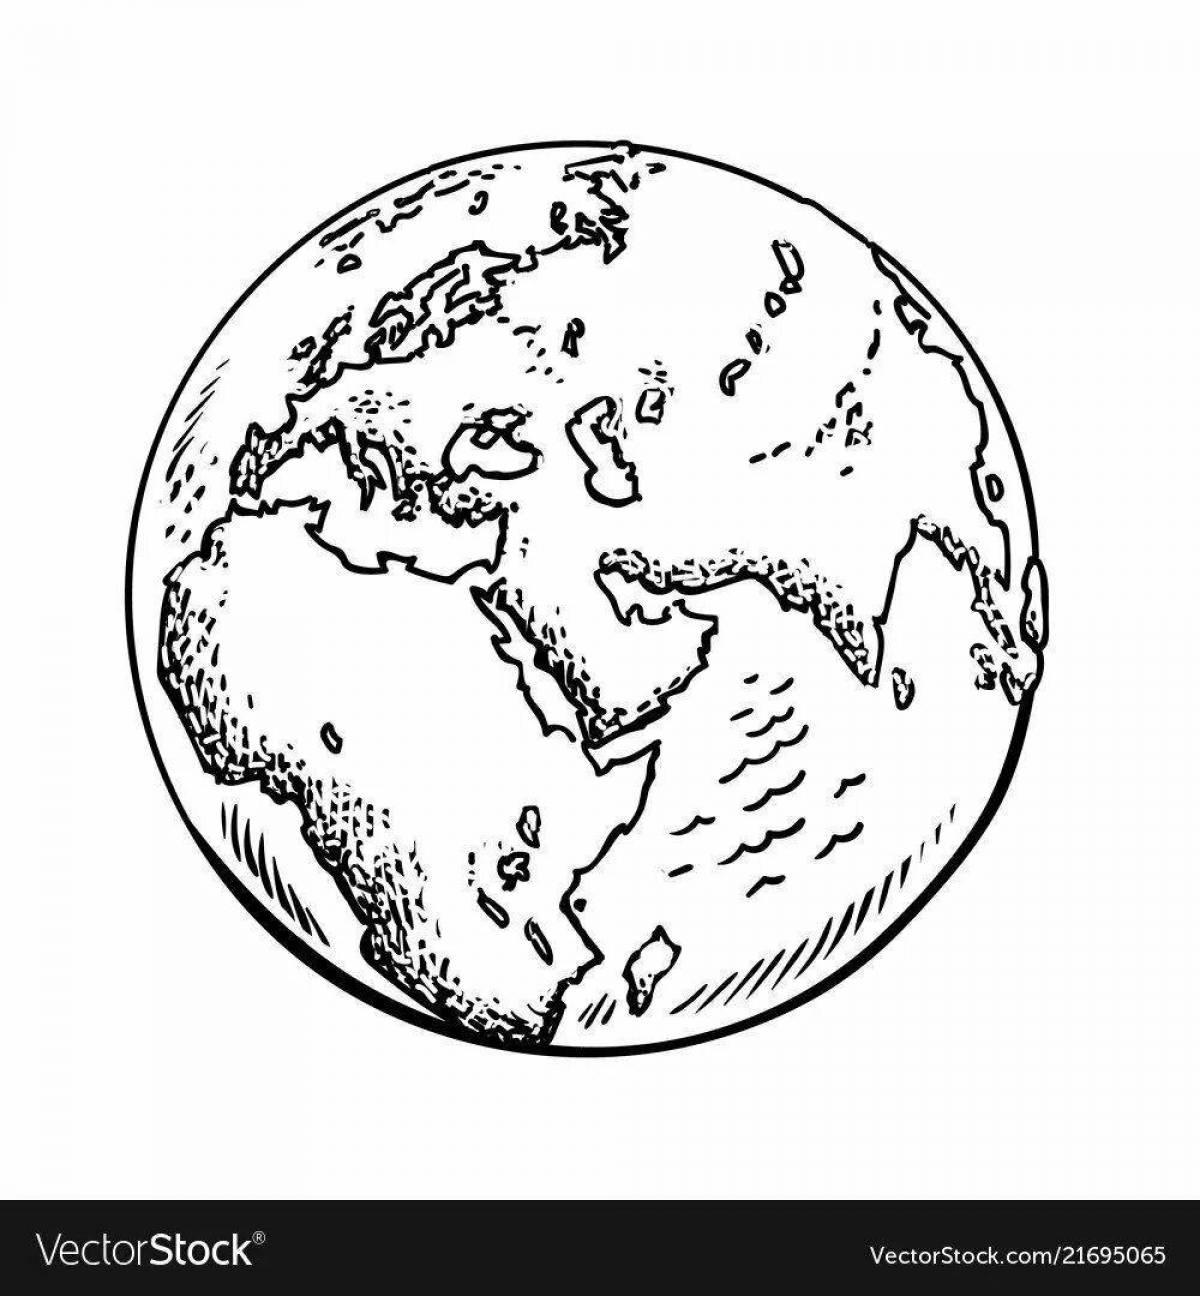 Exquisite earth structure coloring book